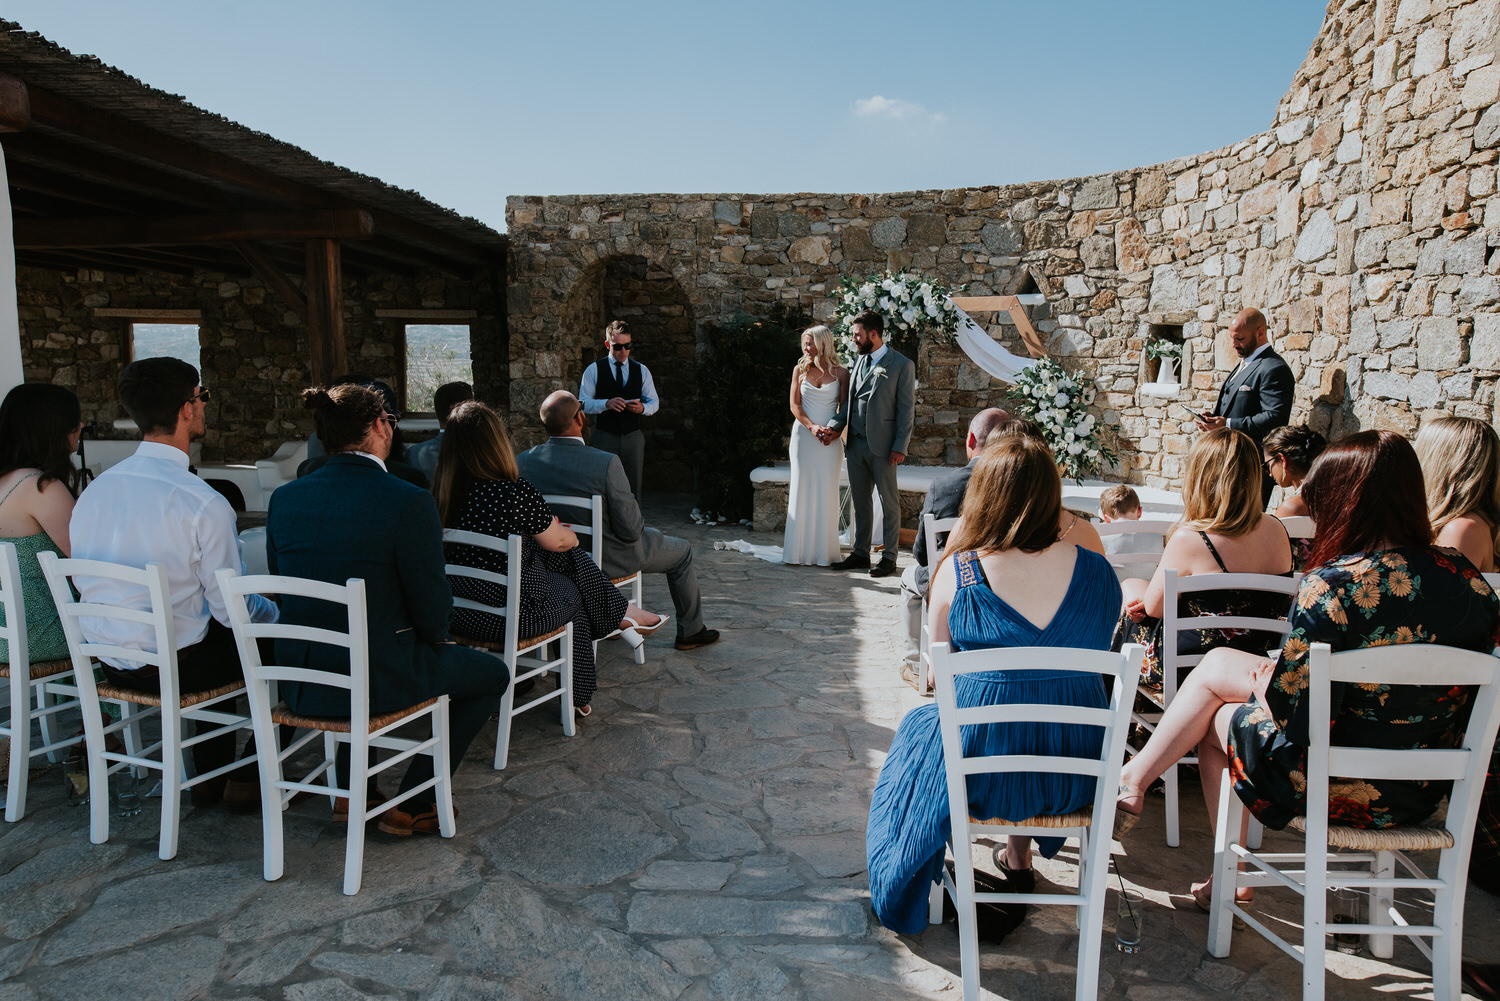 Mykonos wedding photographer: panoramic photo of bride and groom holding hands during the ceremony as they and the guests listen to a friend reading.